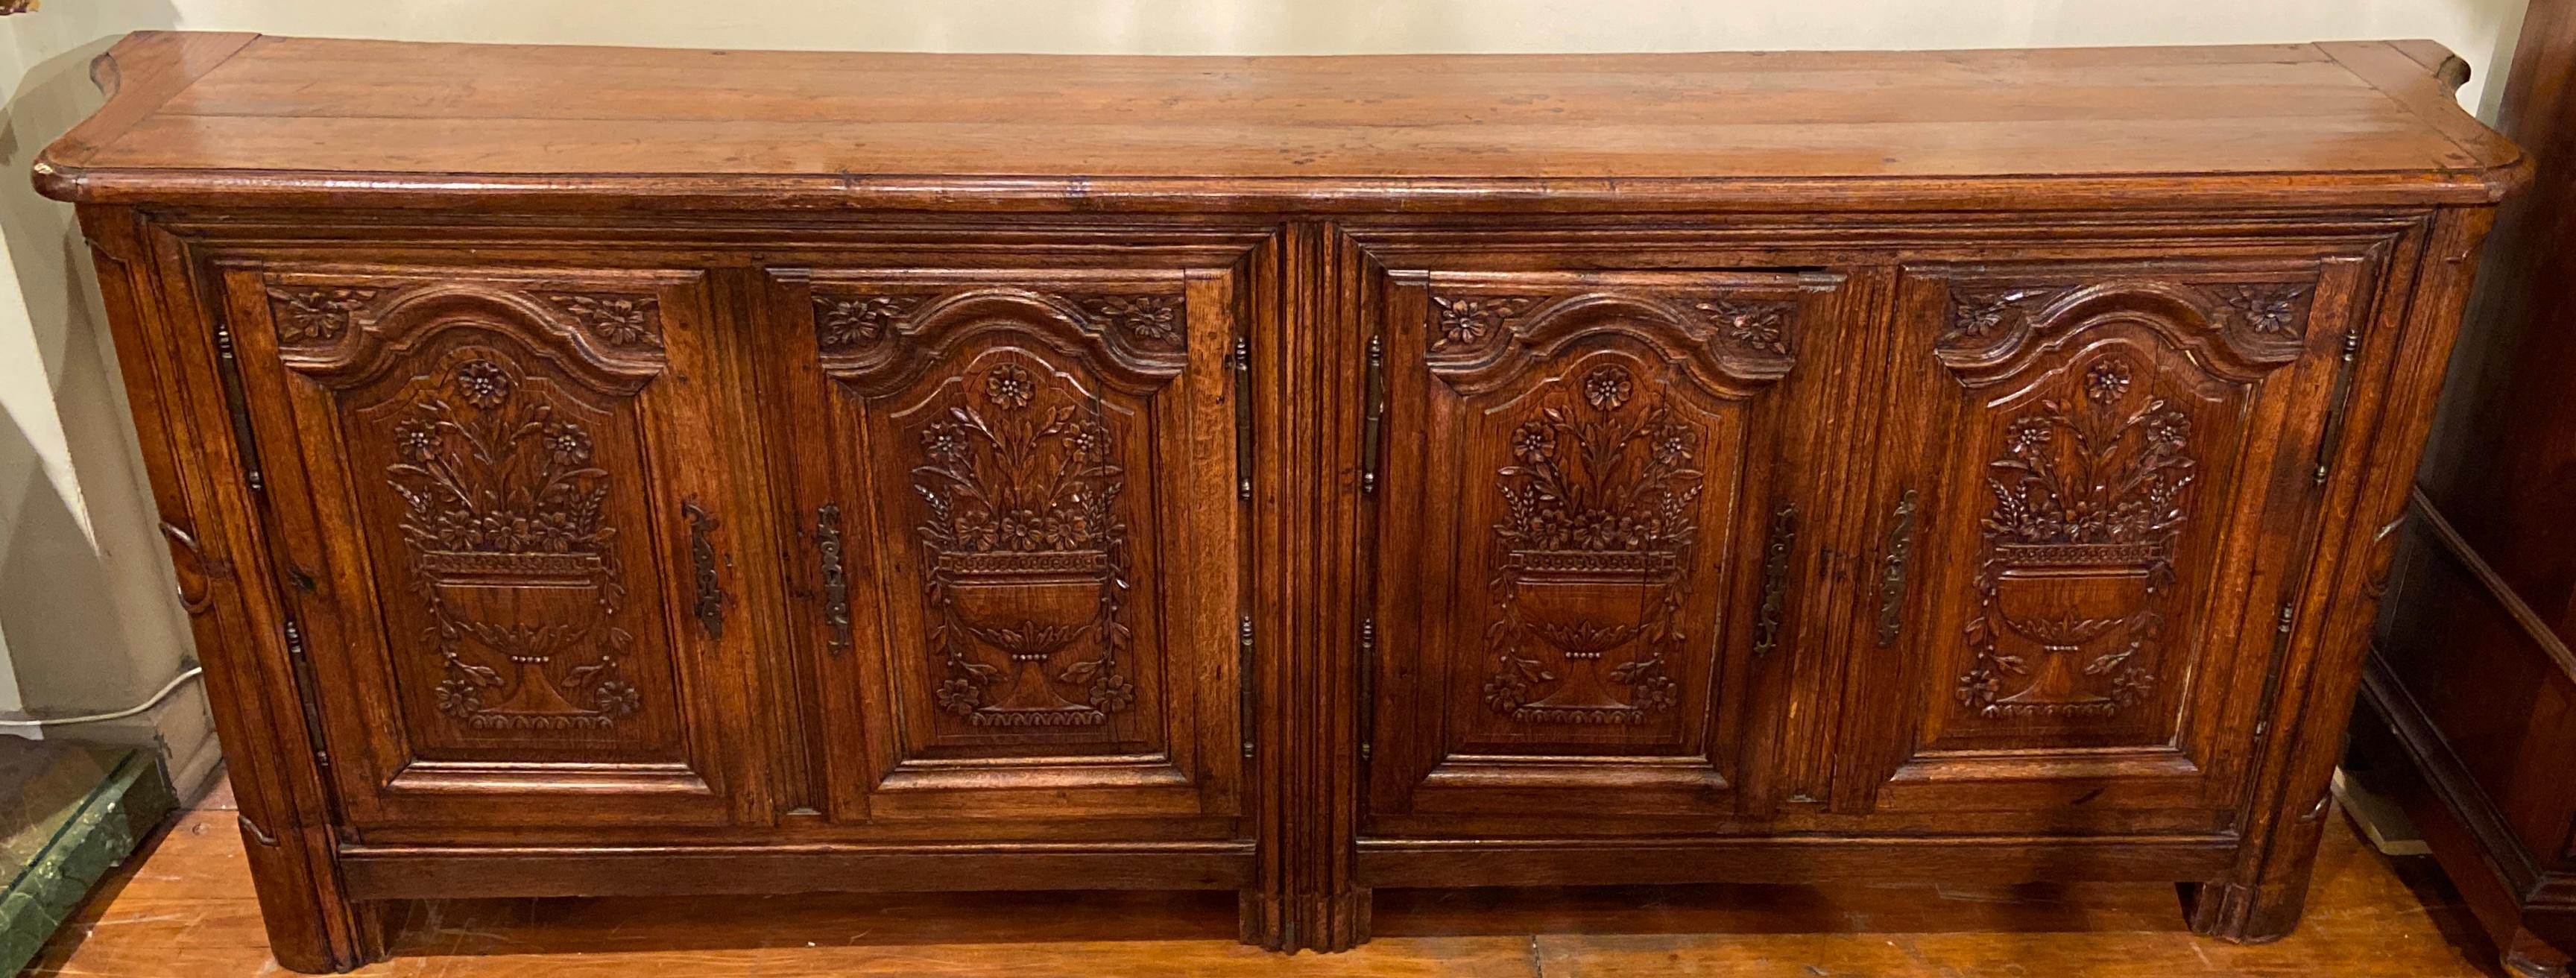 Antique French Provincial carved oak sideboard, circa 1860.